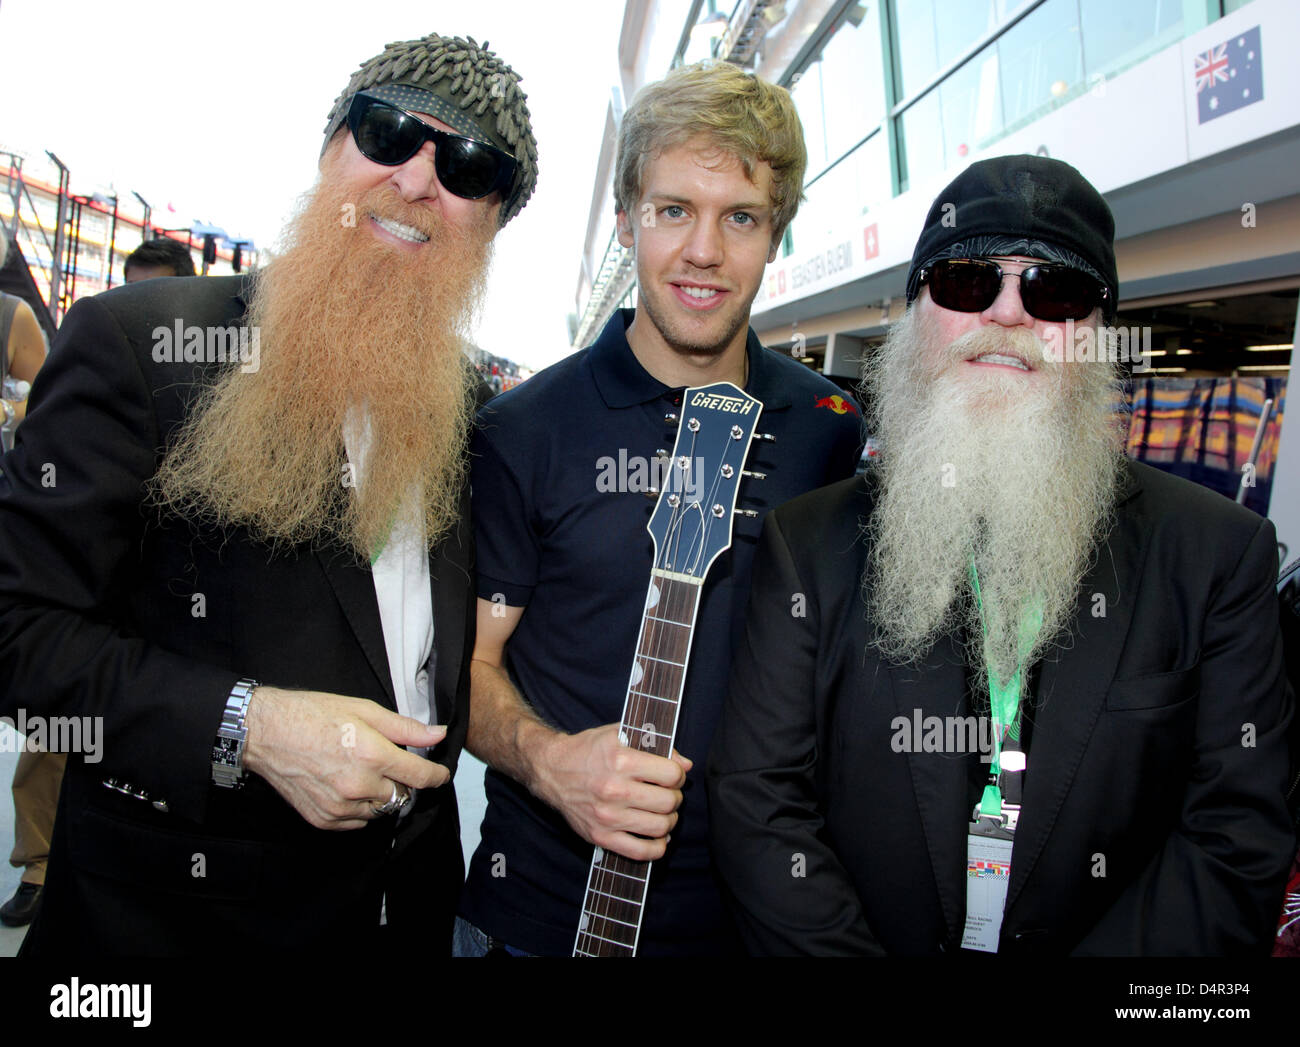 The members of ZZ Top, Dusty Hill (R) and Billy Gibbons (L), pose with  German Formula One driver Sebastian Vettel of Red Bull in the paddock at  Marina Bay Street Circuit in